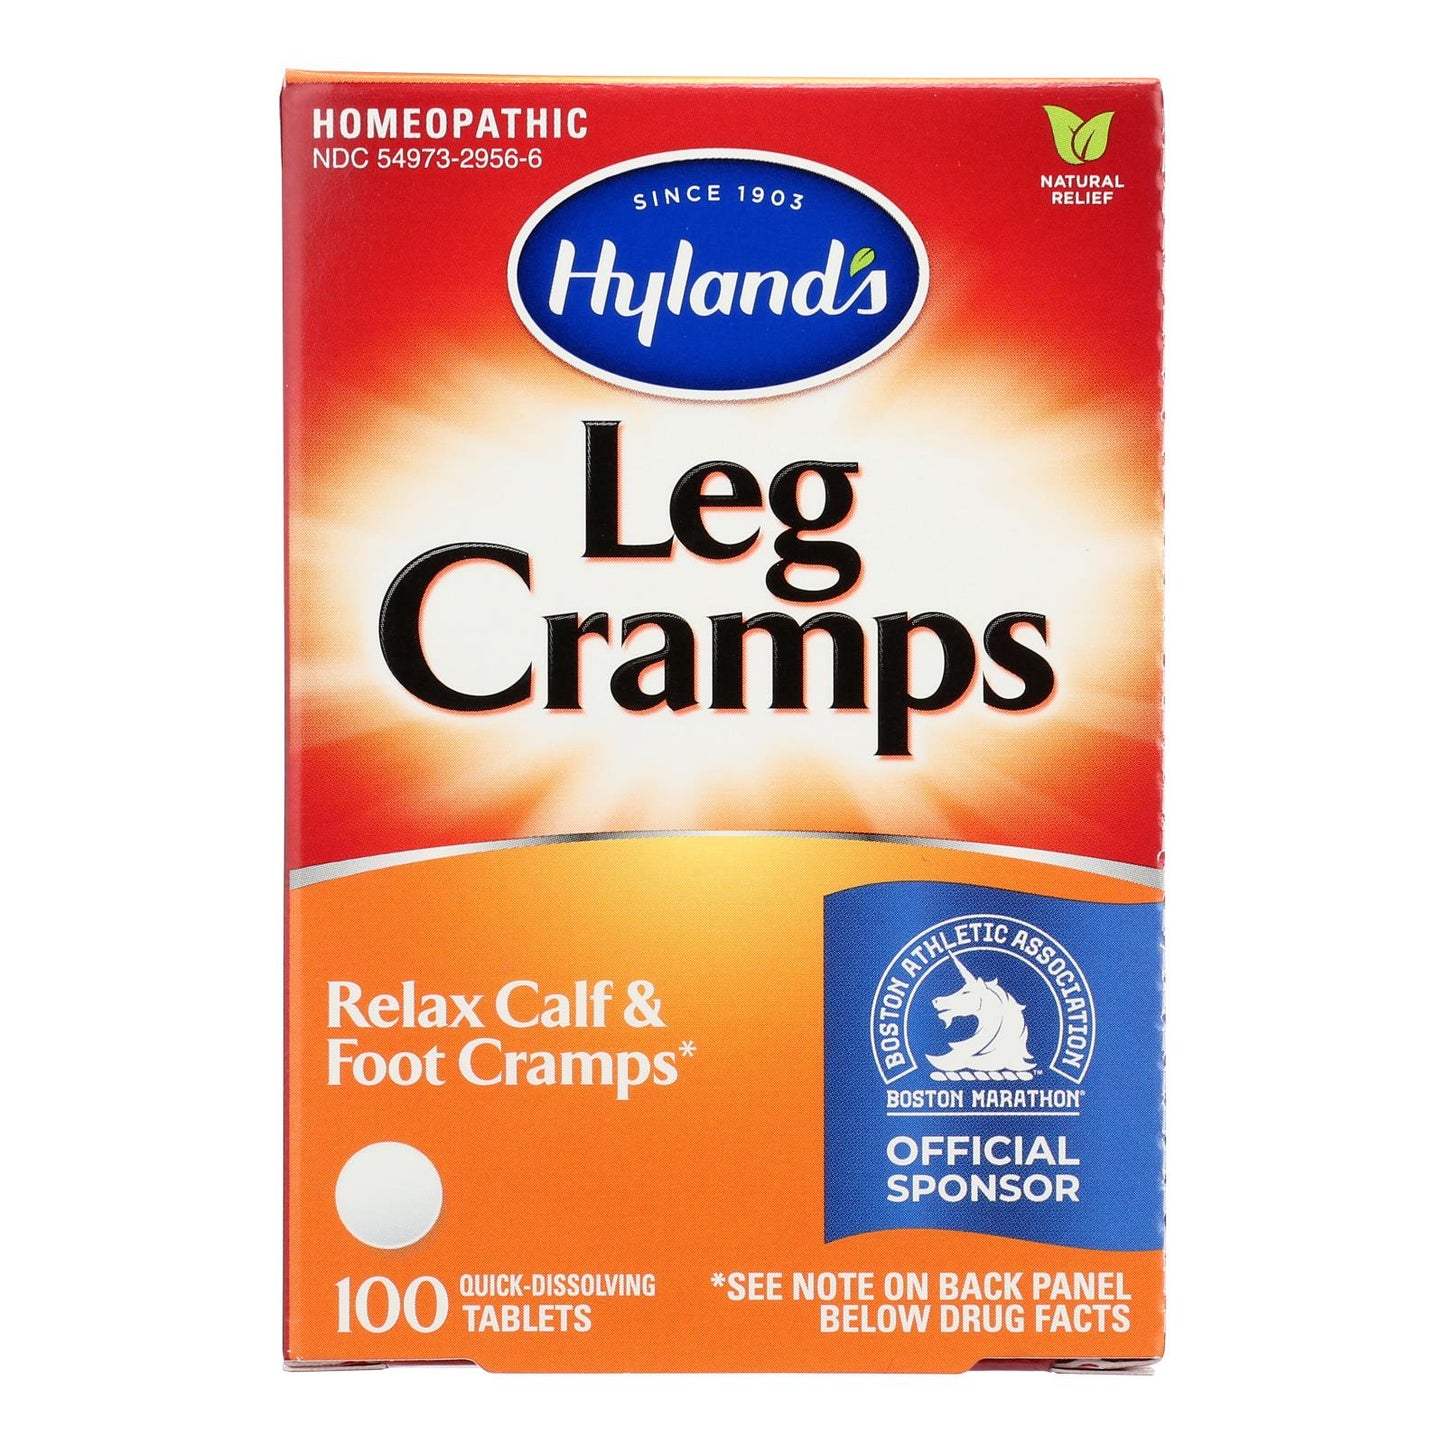 Hyland's Leg Cramps Relief, 100 Tablets